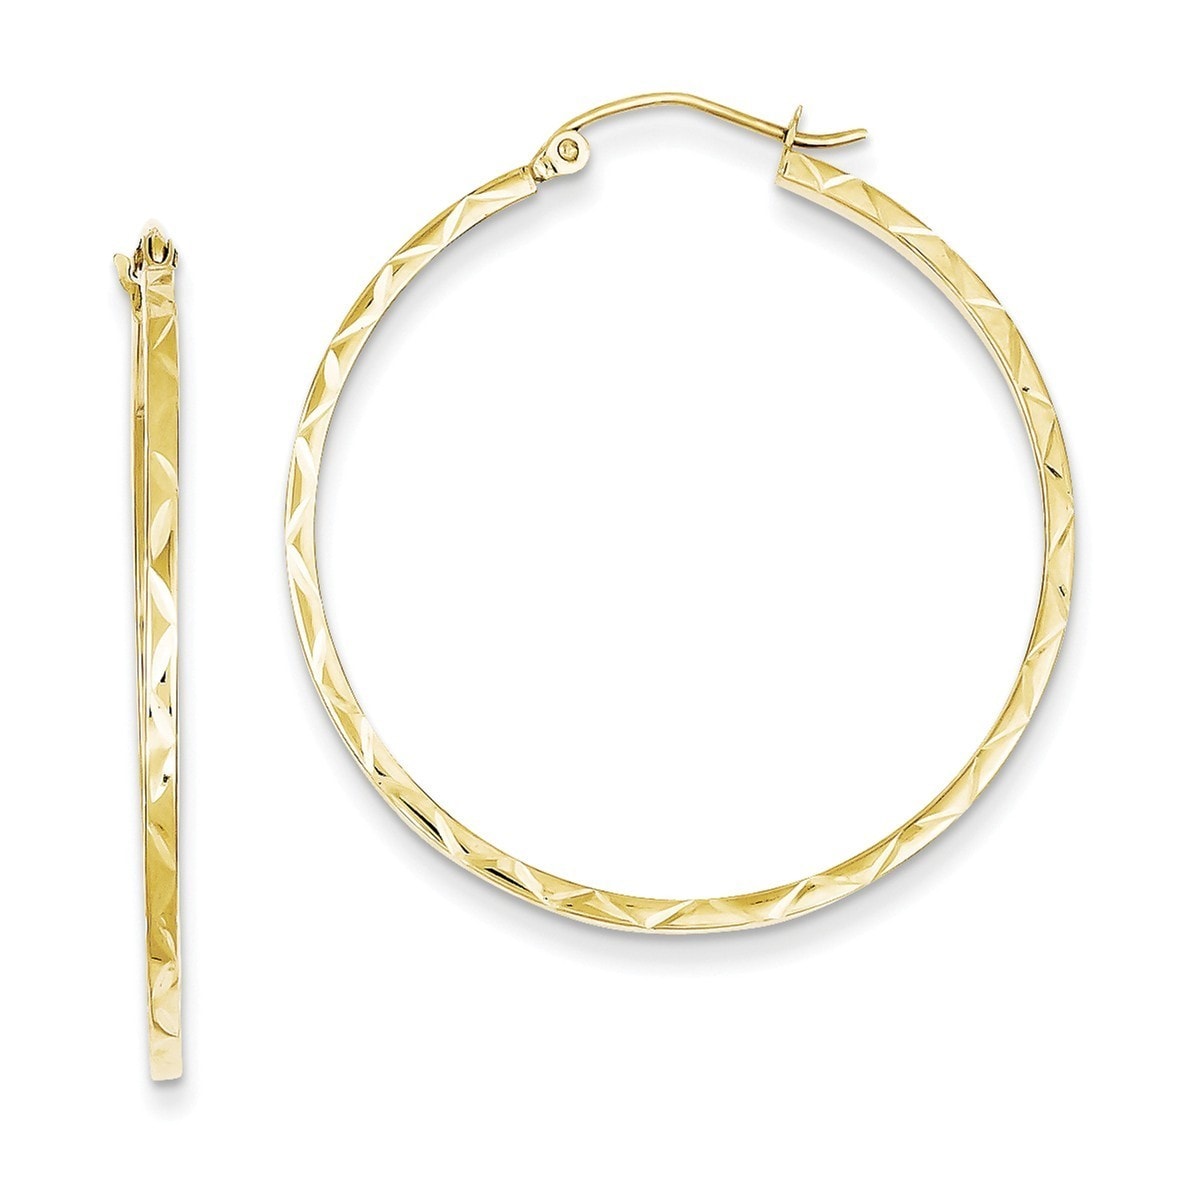 14K Yellow Gold 1.5X35mm Diamond Cut with Polished Wire Hoop Earrings